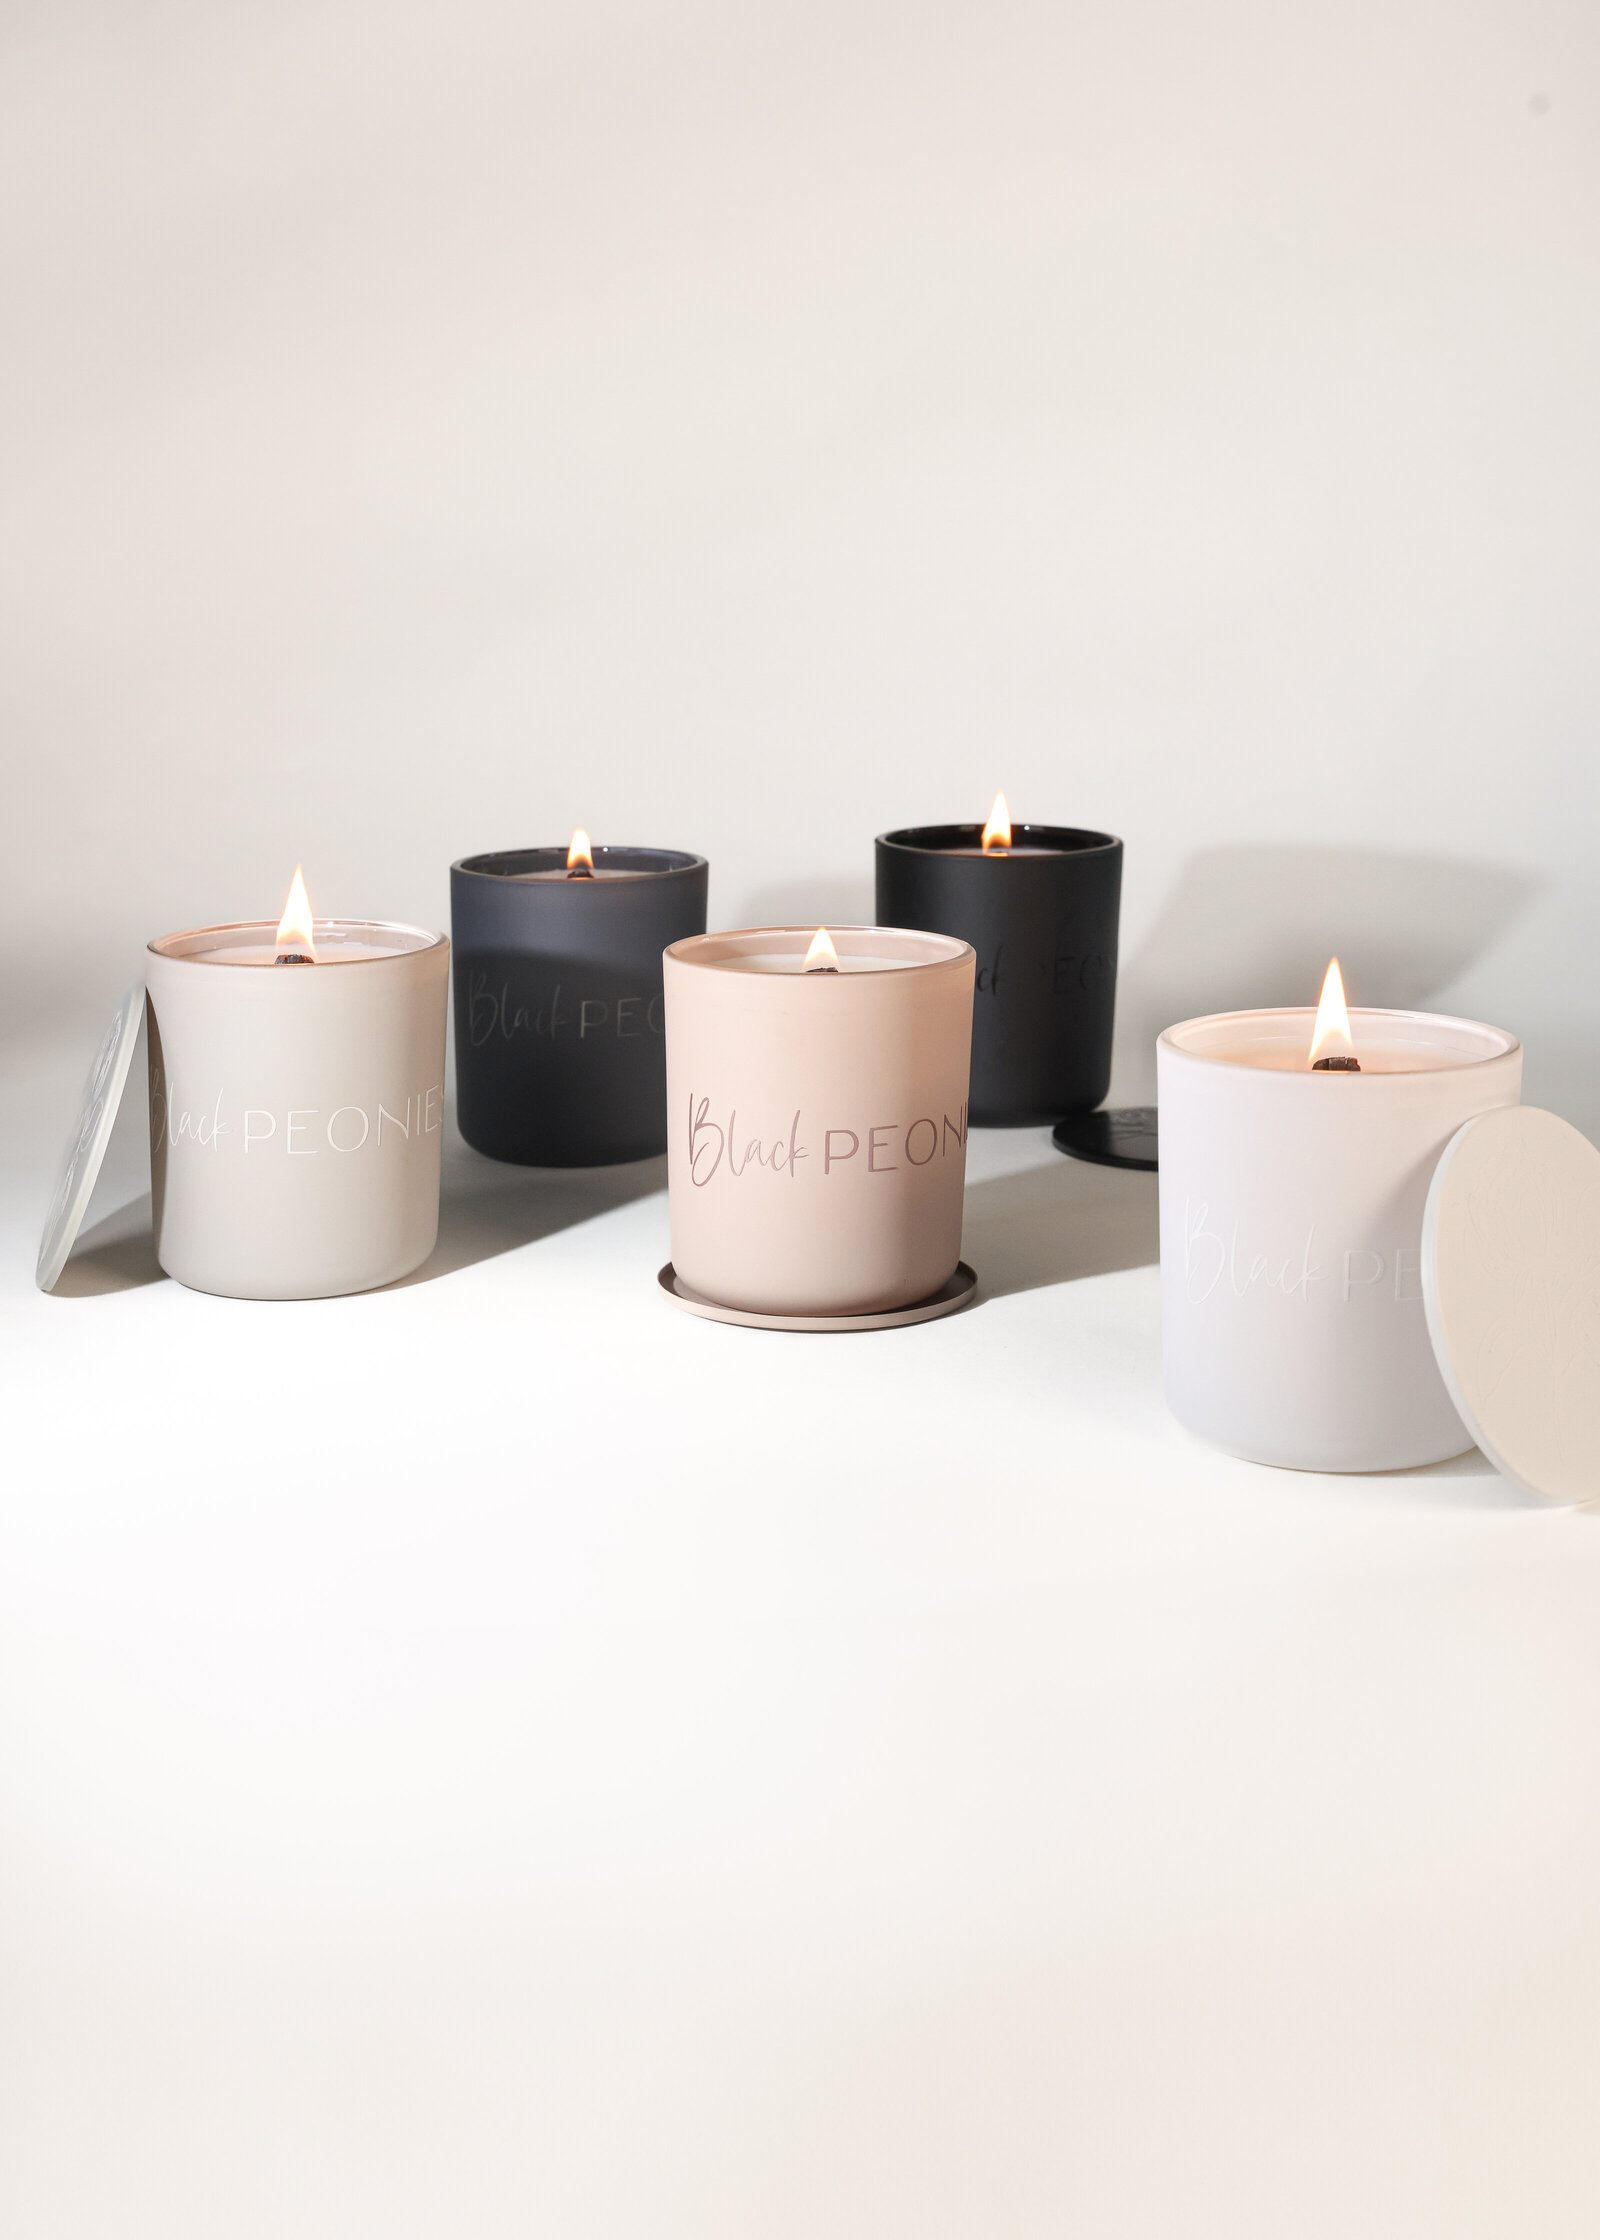 Minimal clean luxe product photography for candles. Small business product photographer in San Diego.